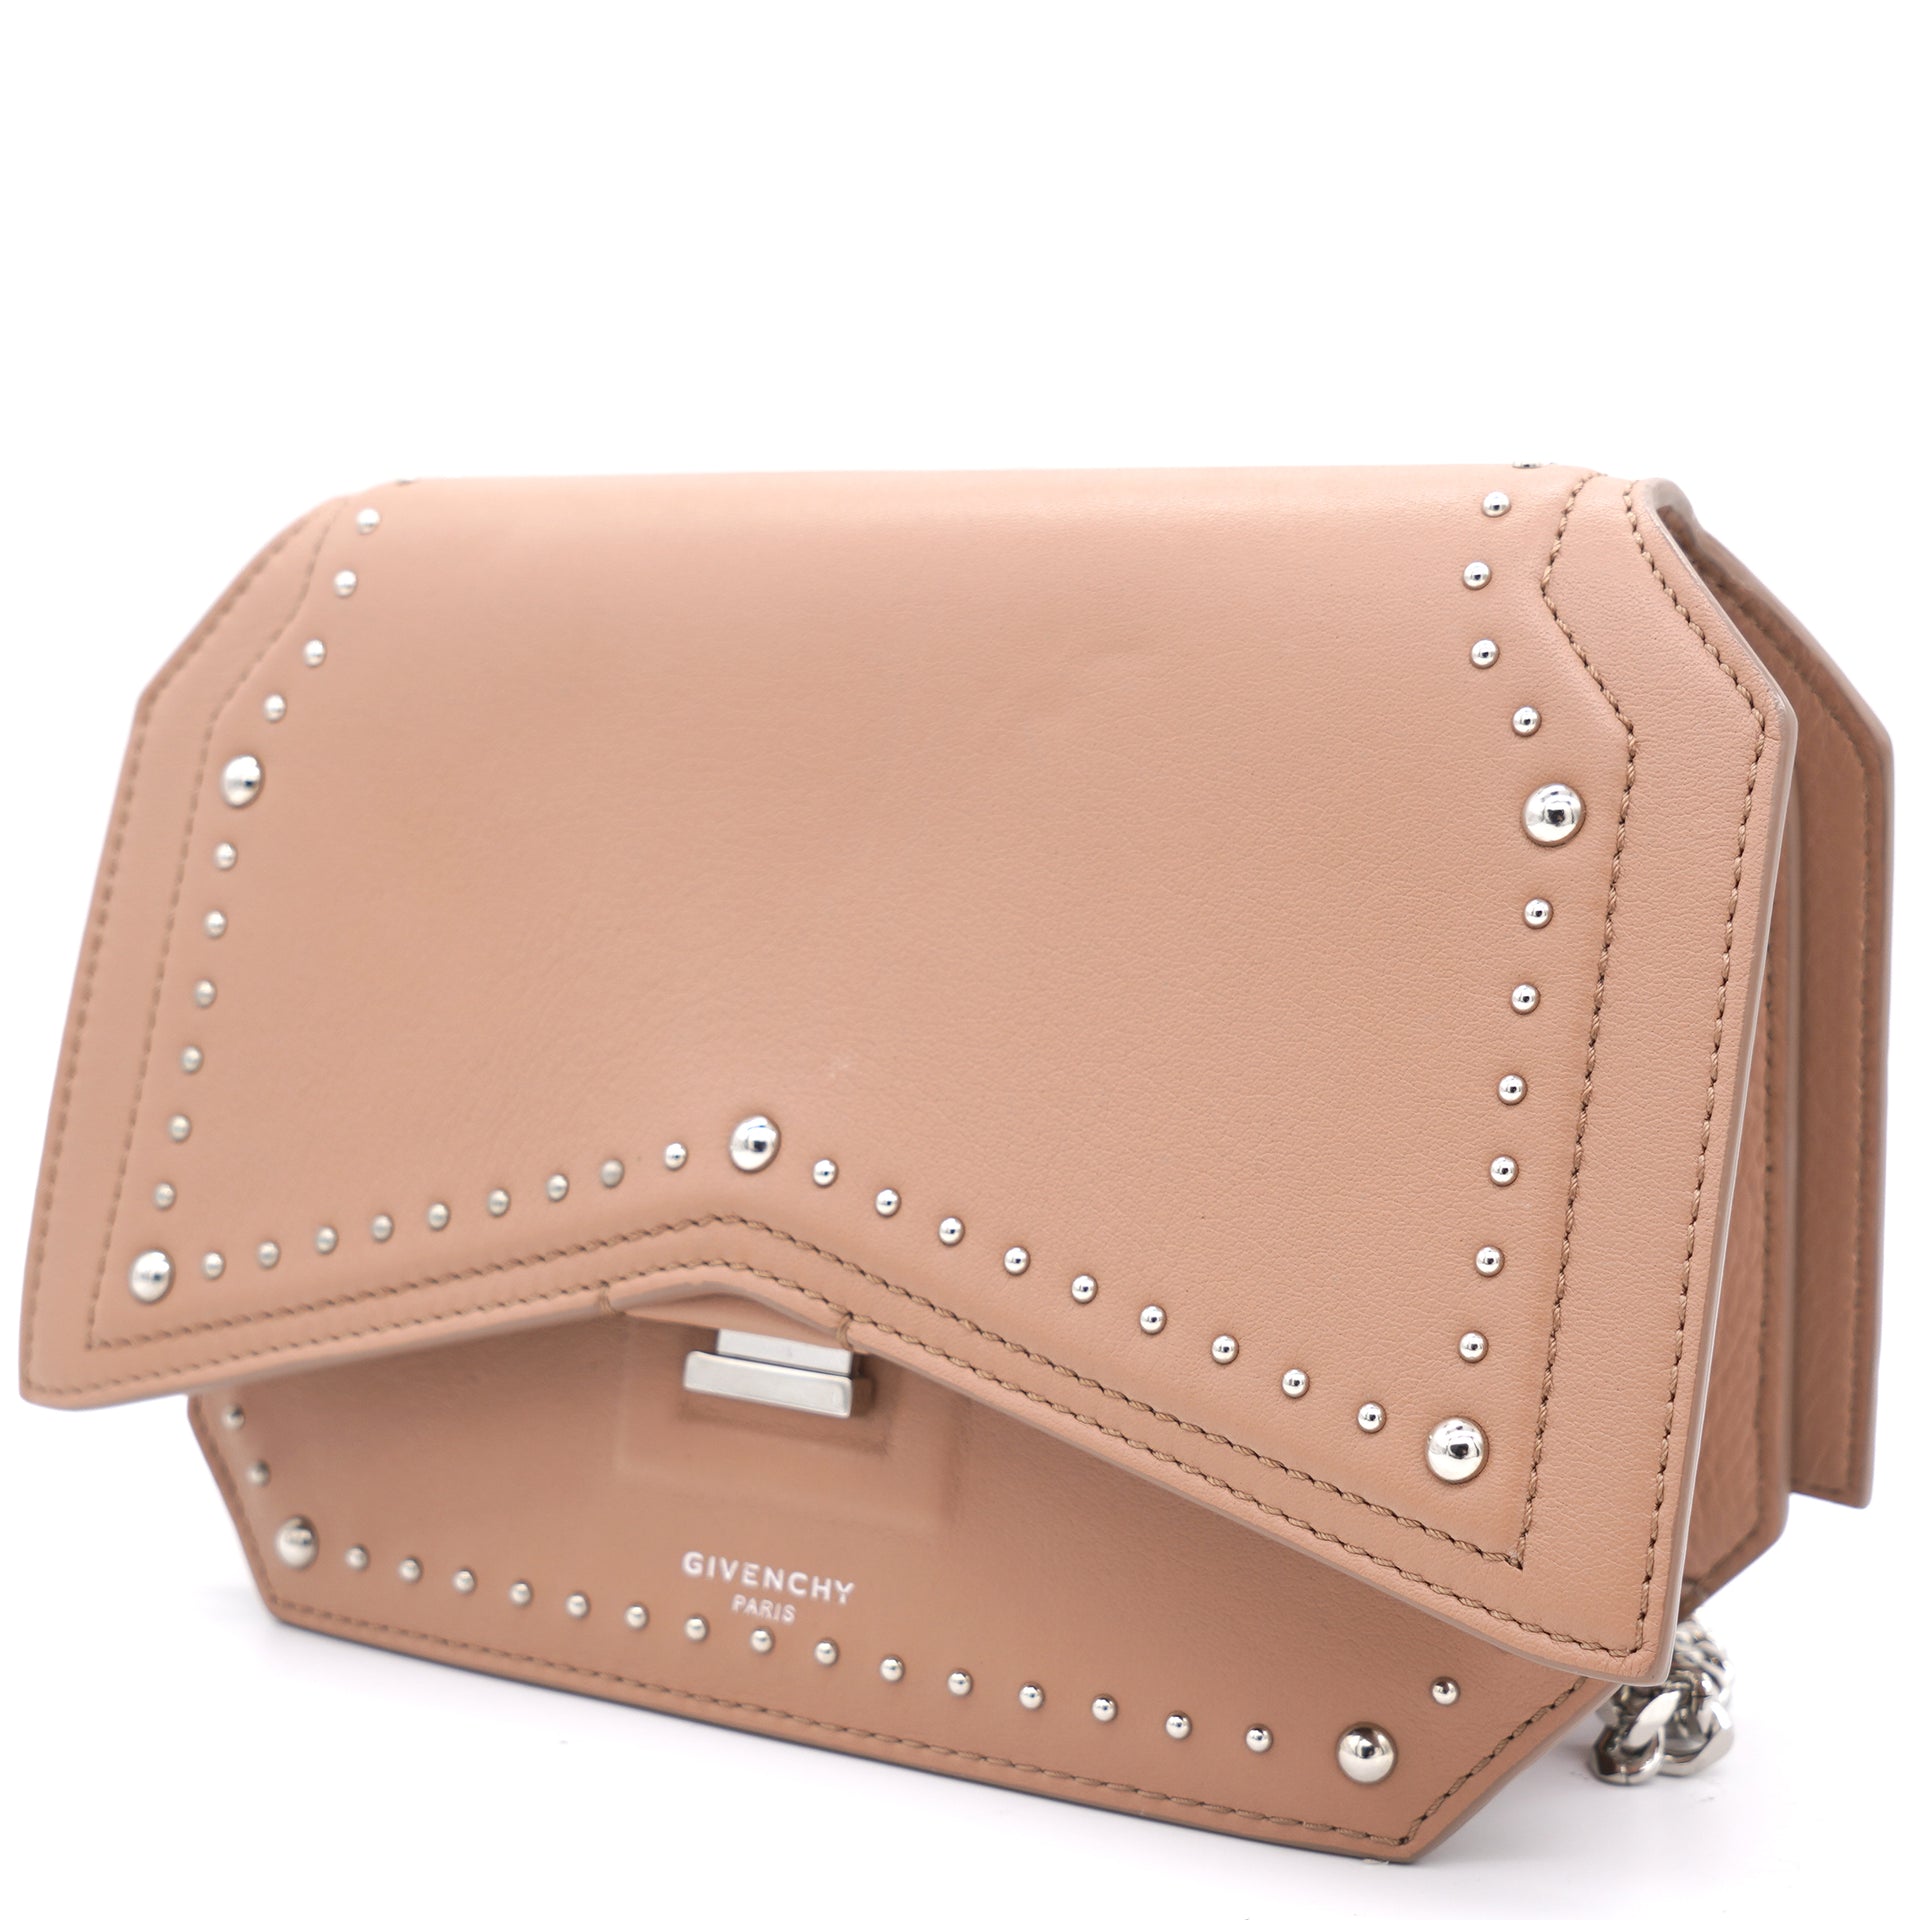 Studded Leather Bow Cut Chain Flap Nude Bag